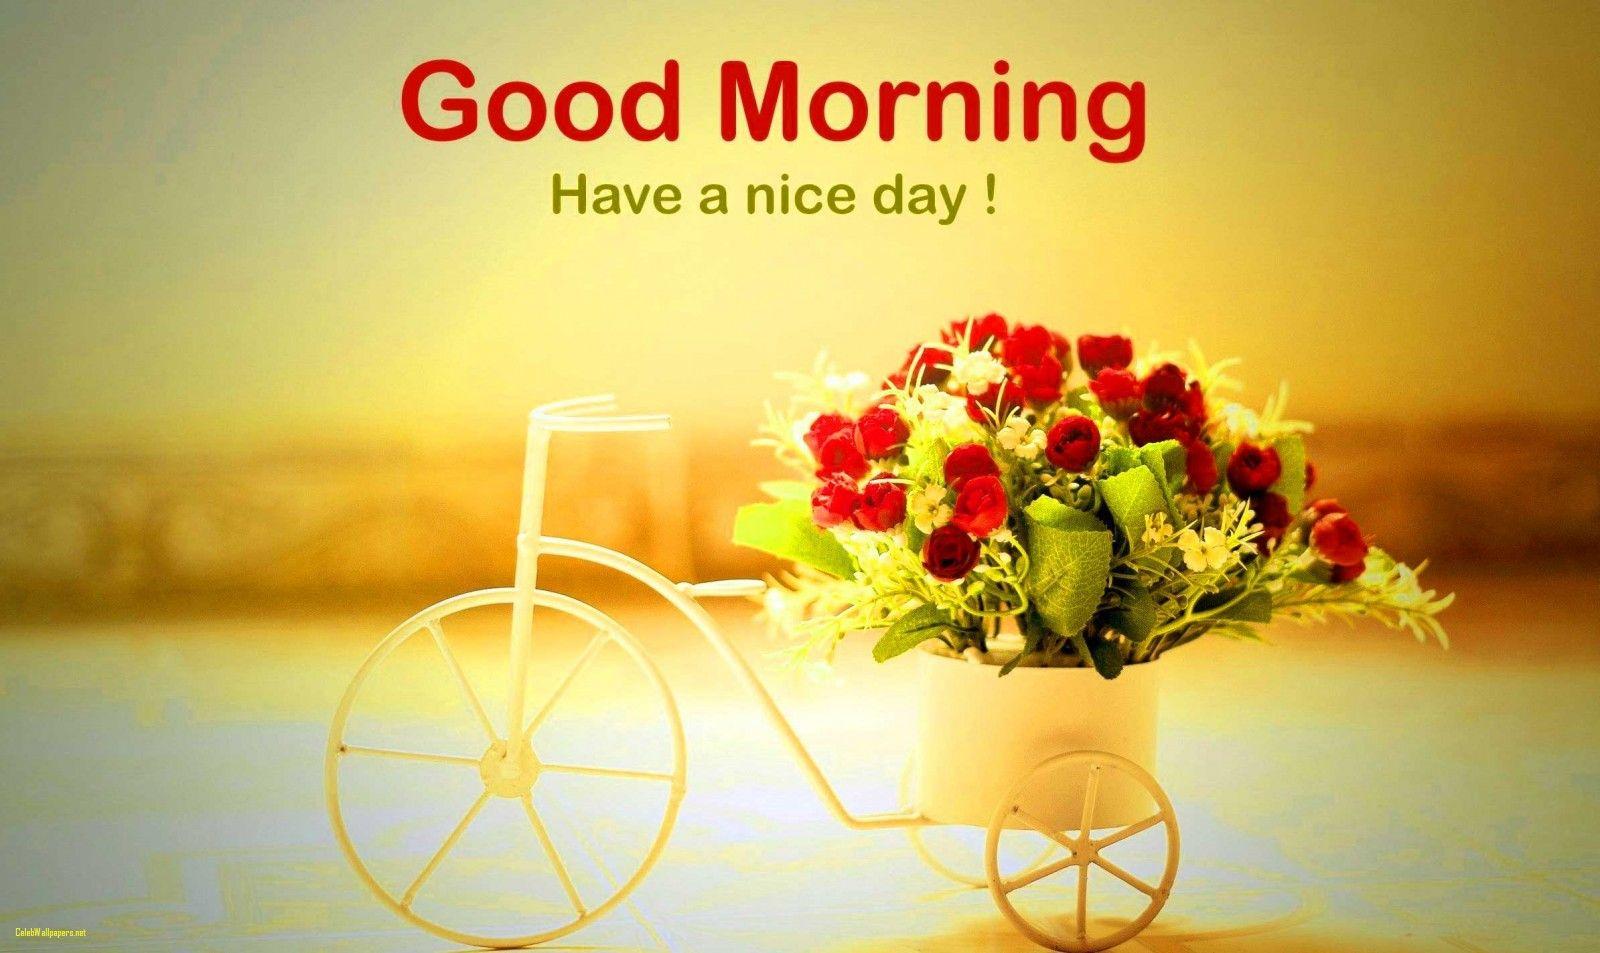 Good Morning HD Image Good Morning Wallpaper Picture Free Download